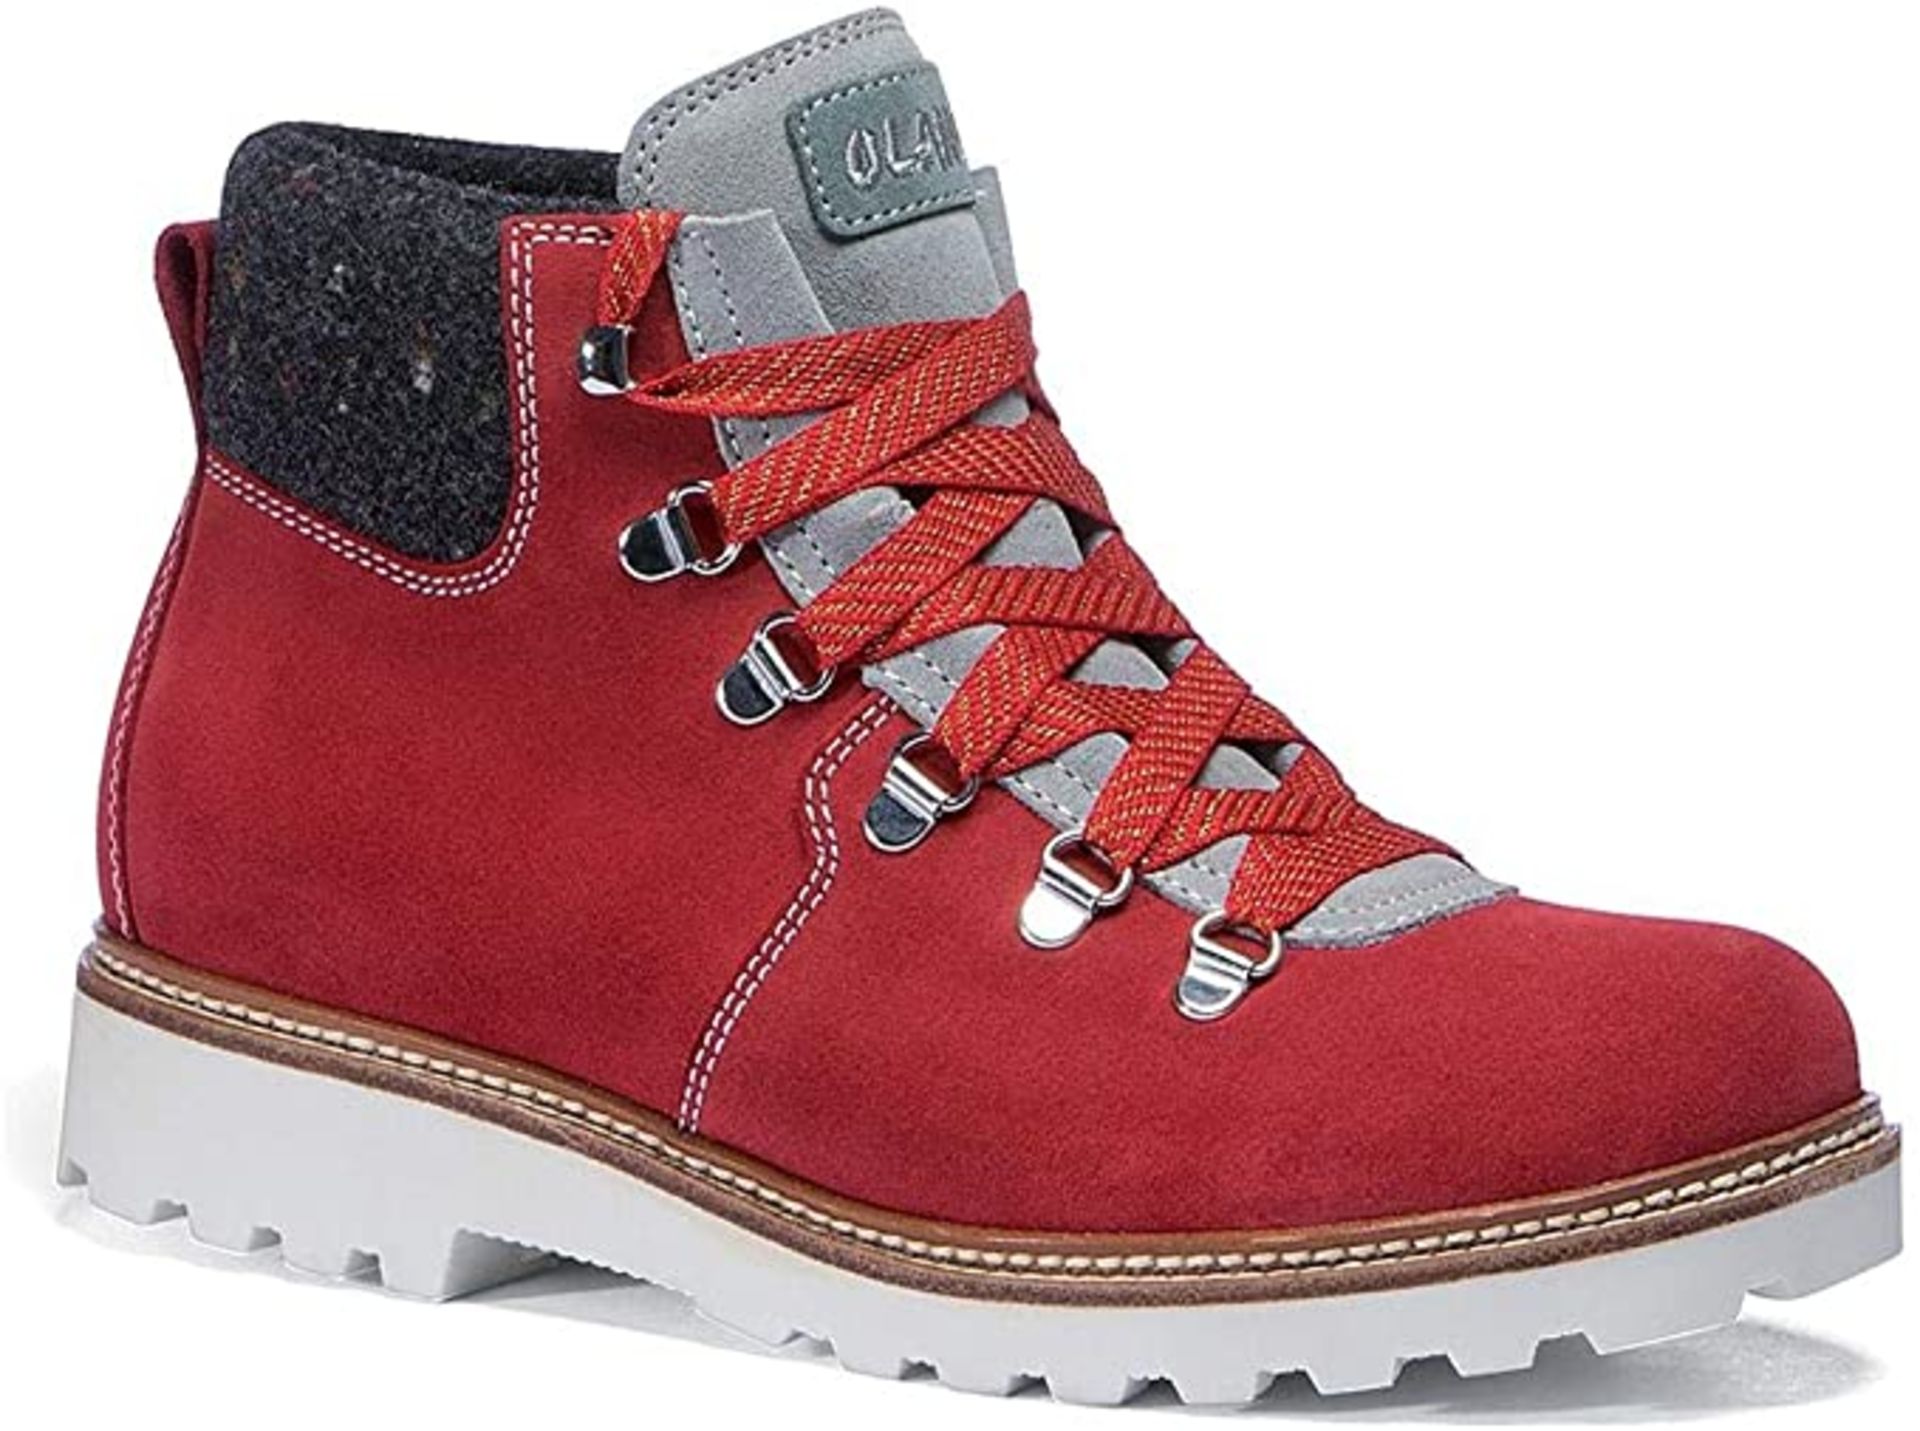 1 x Pair of Designer Olang Merano BTX 815 Rosso Women's Winter Boots - Euro Size 39 - Brand New - Image 2 of 4